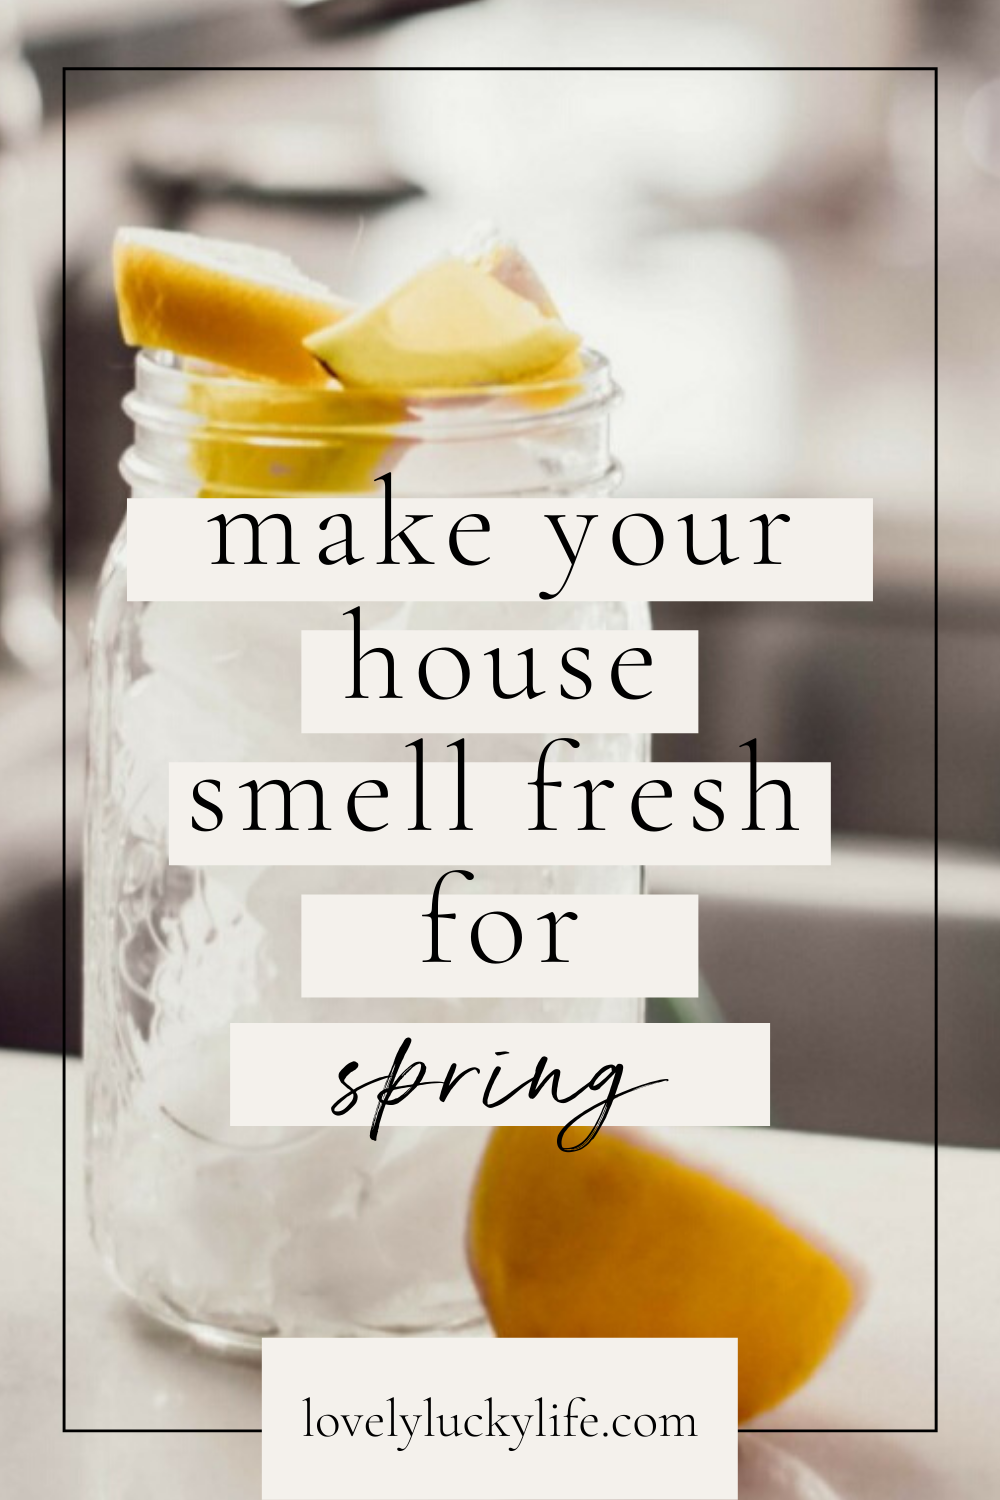 How To Make Your House Smell Fresh For Spring